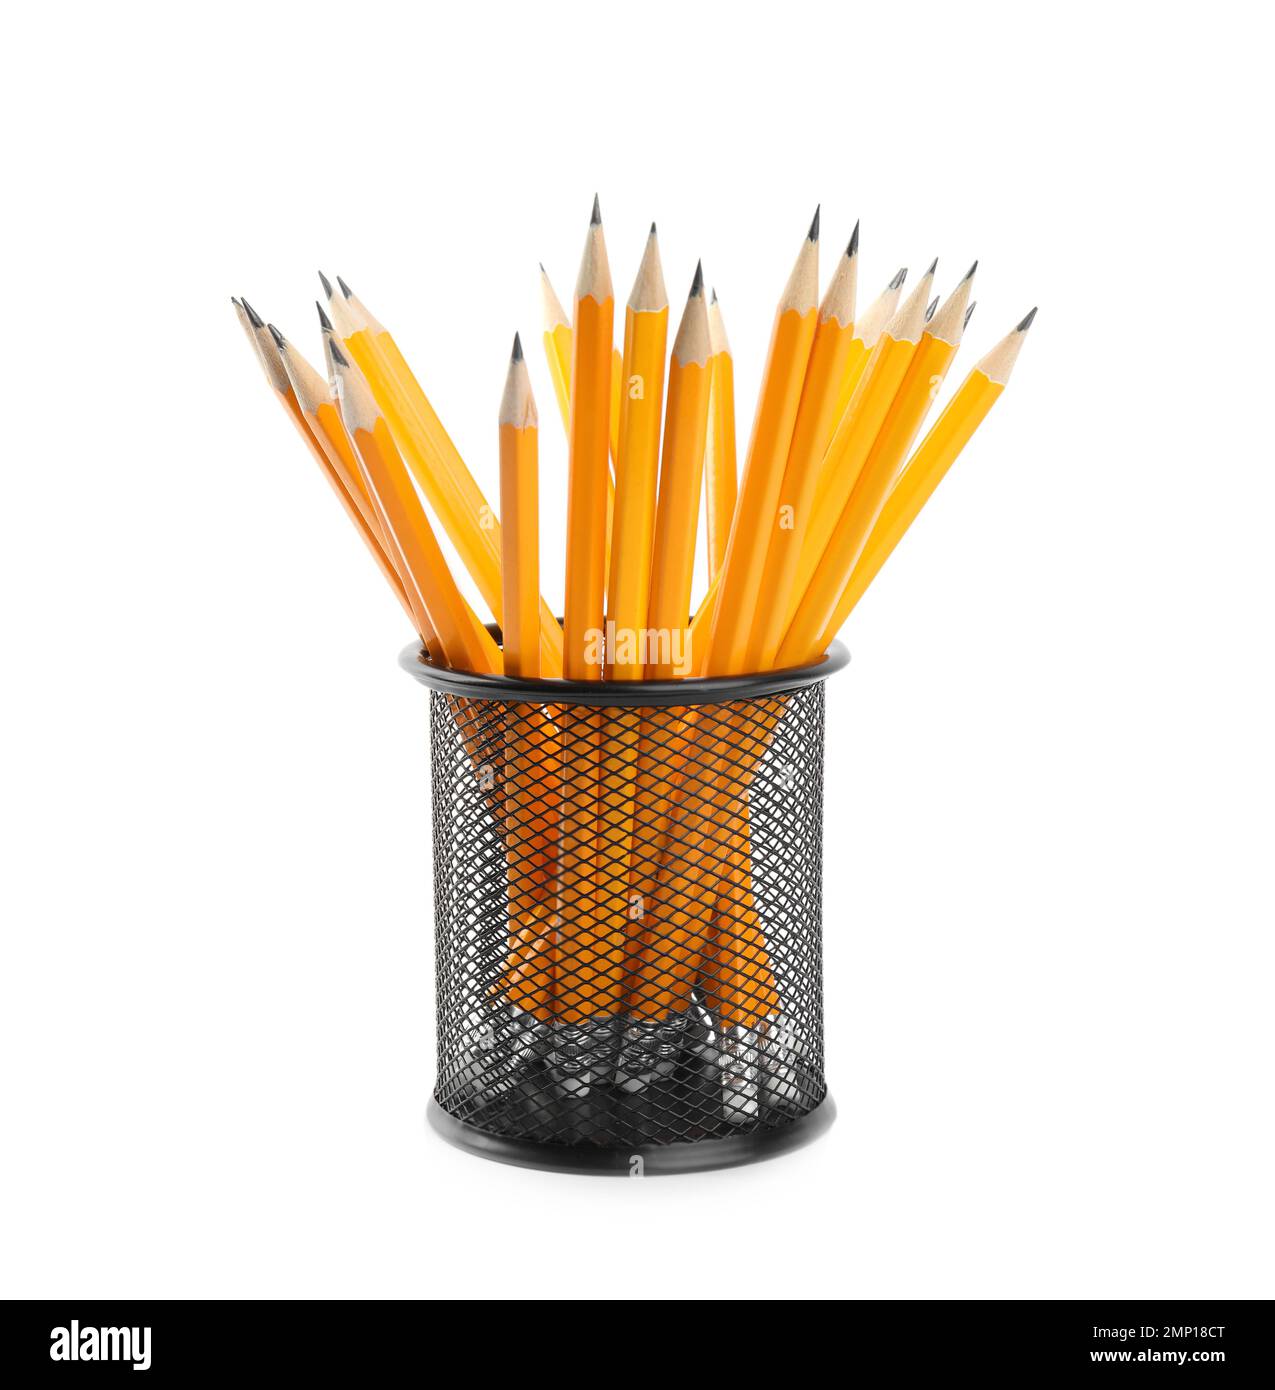 Many sharp pencils in holder isolated on white Stock Photo